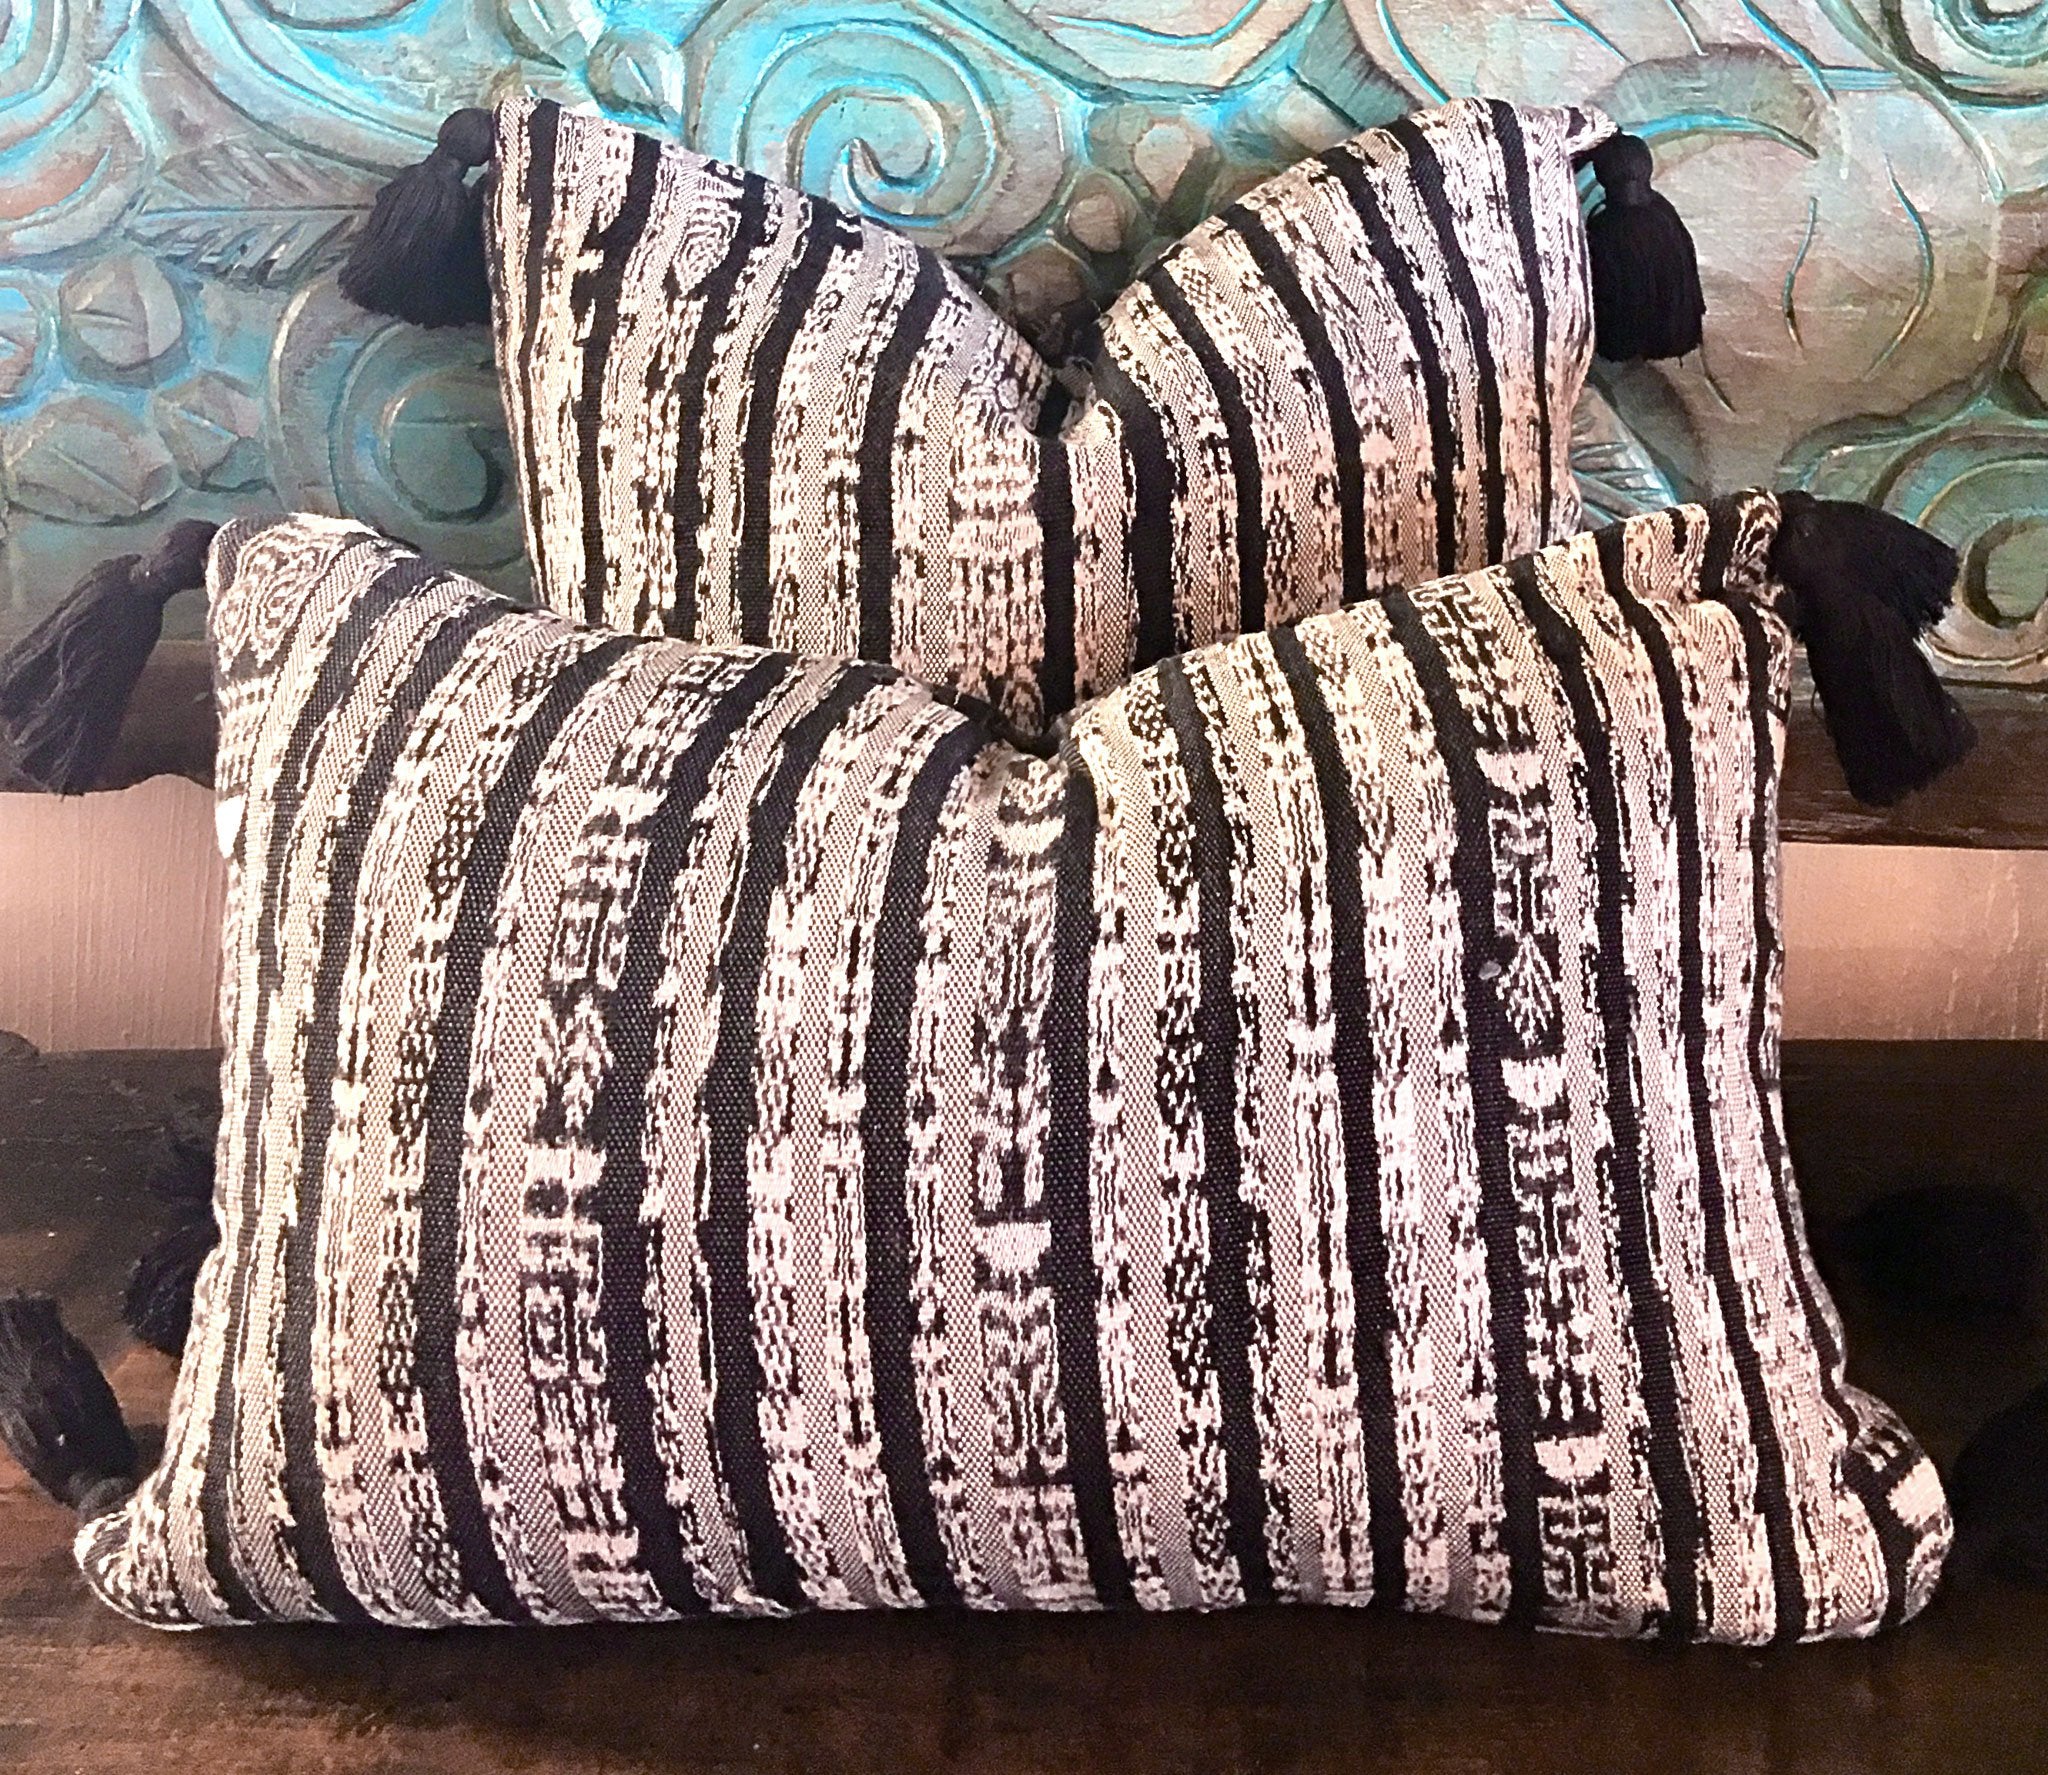 Guatemalan Textile Pillow, vintage, hand woven black and white double sided striped ikat lumbar cushion with tassels